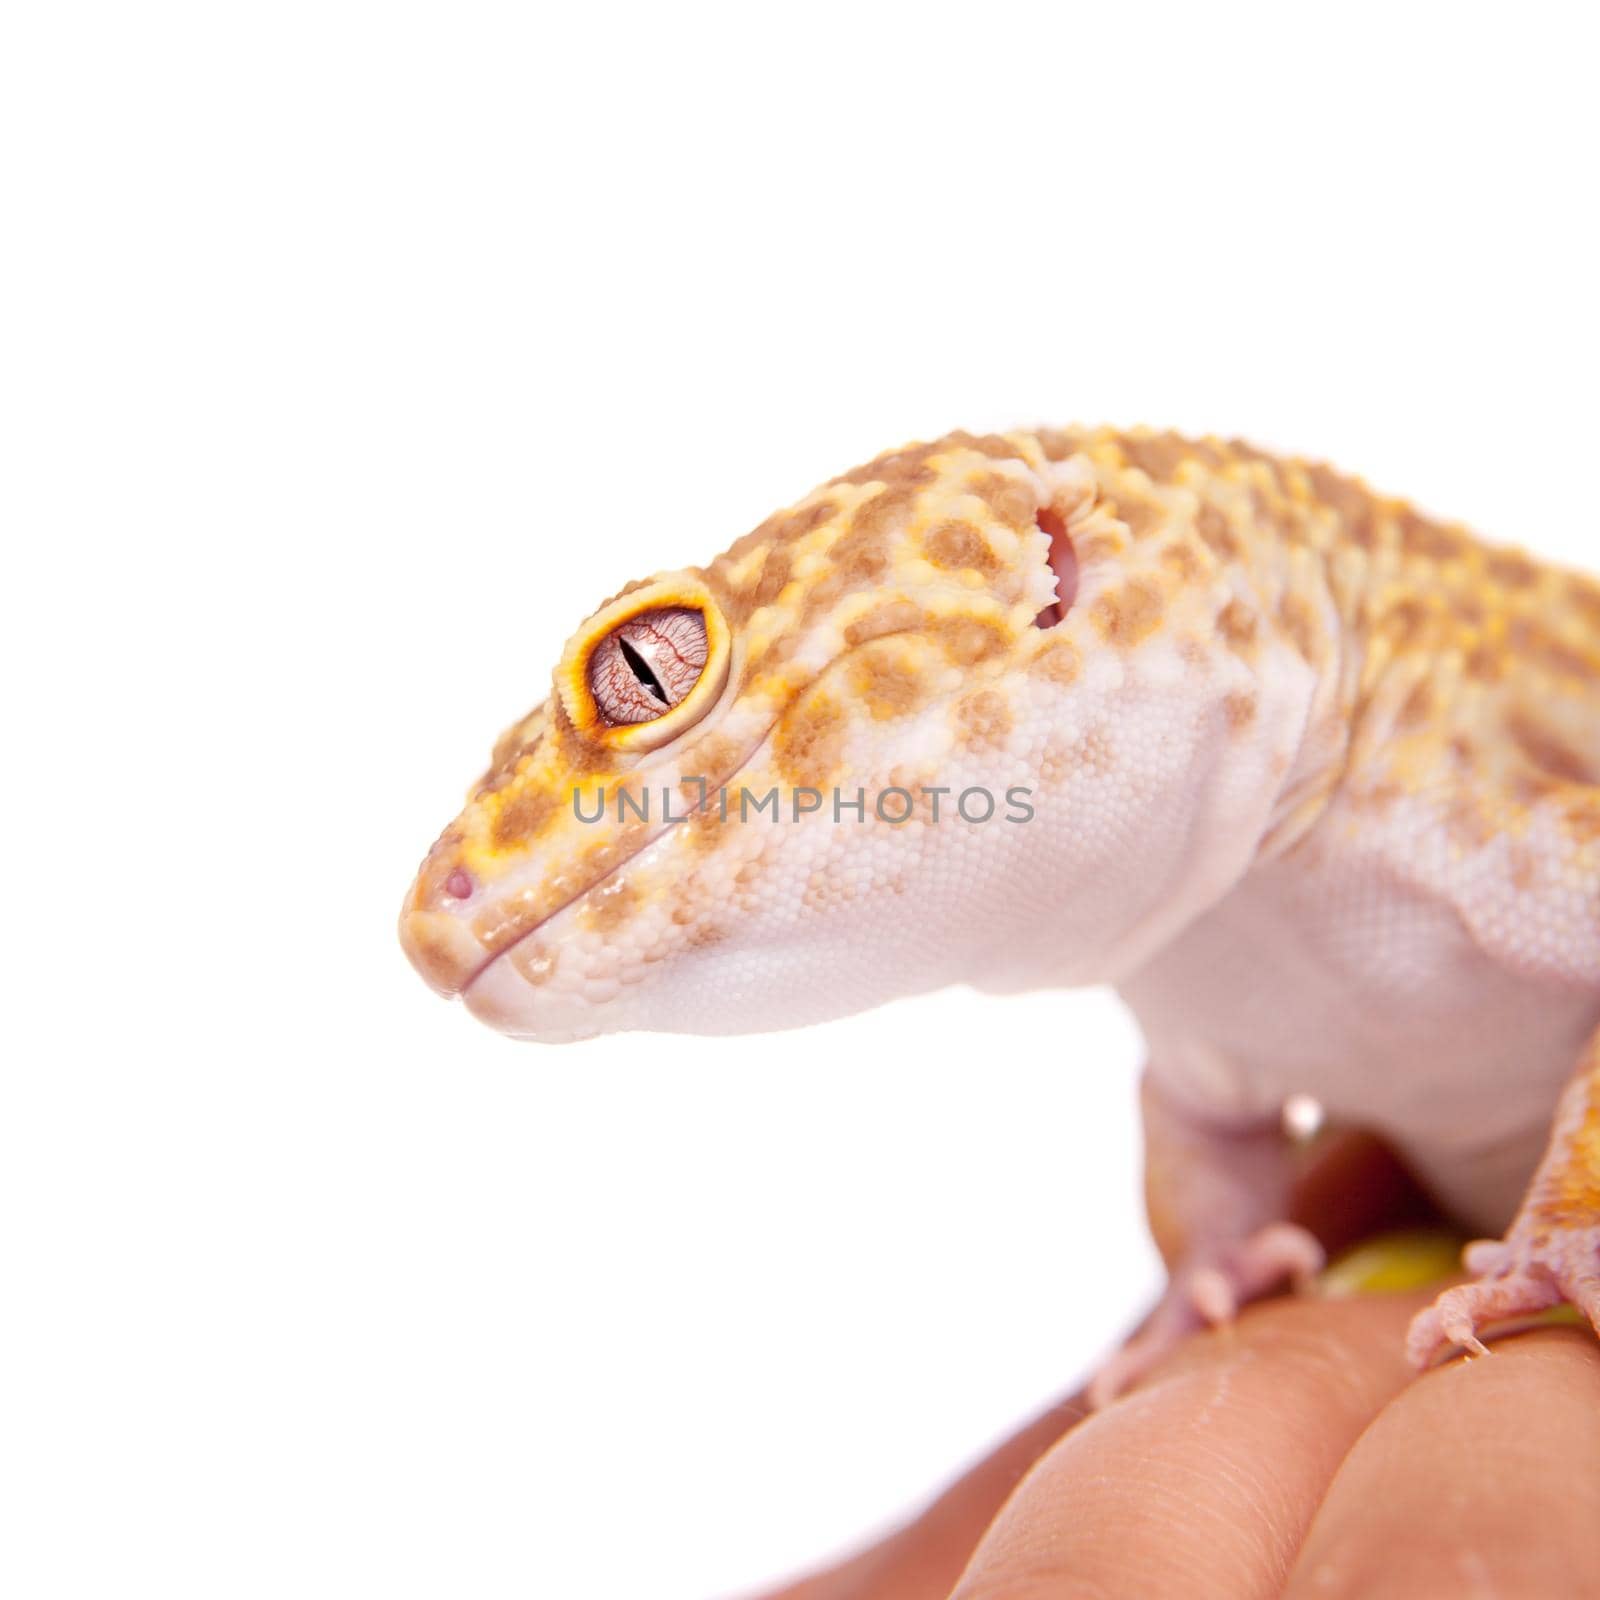 Leopard Gecko on a white background by RosaJay